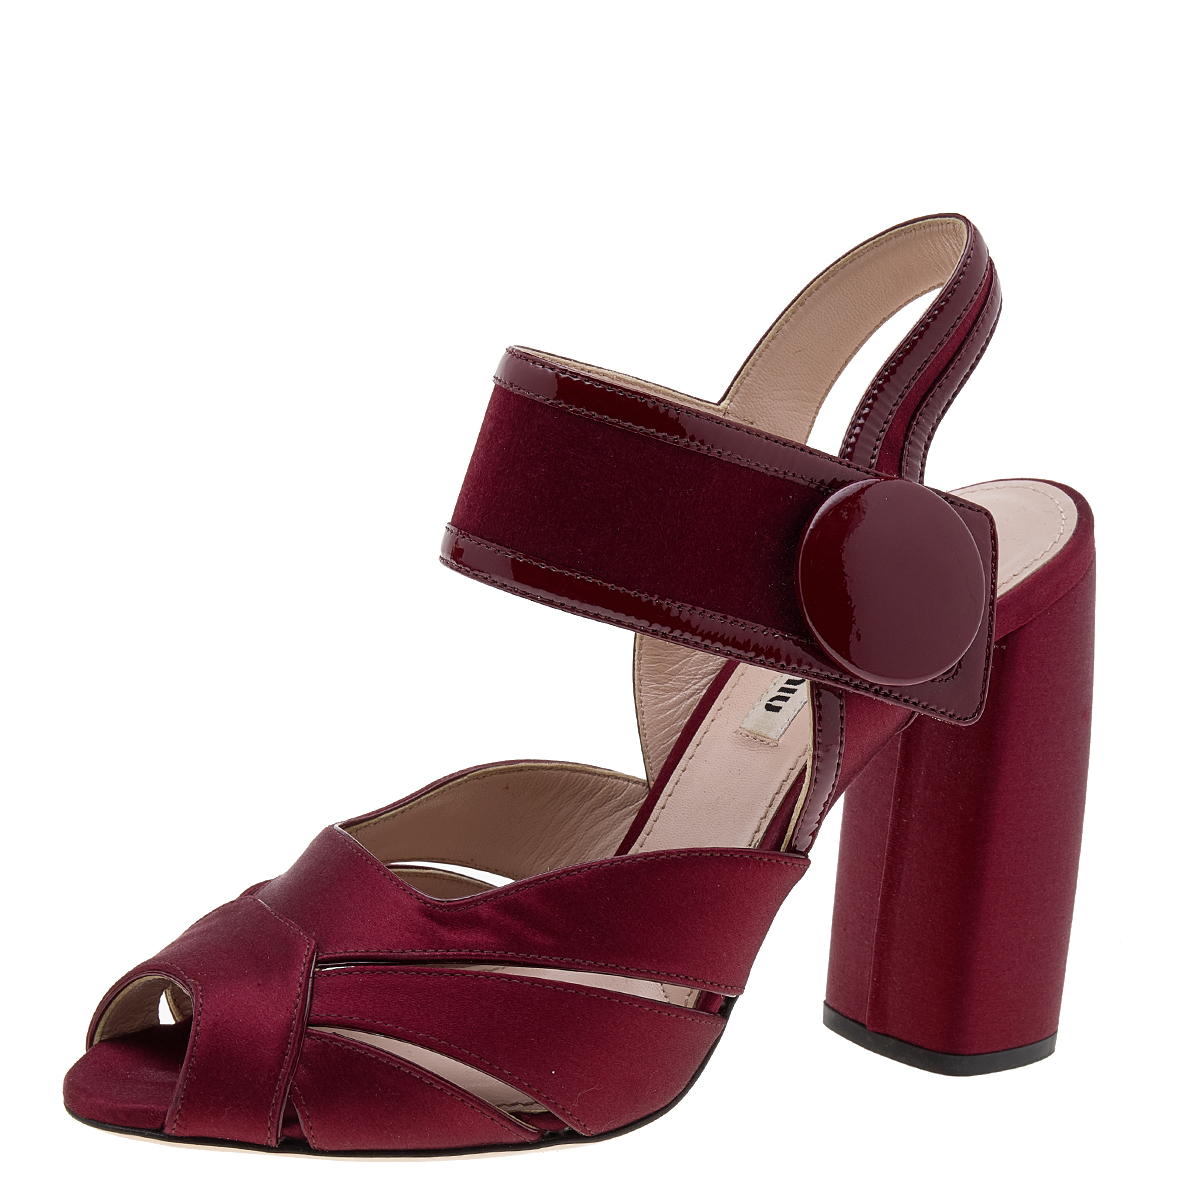 

Miu Miu Burgundy Satin and Patent Leather Ankle Strap Sandals Size